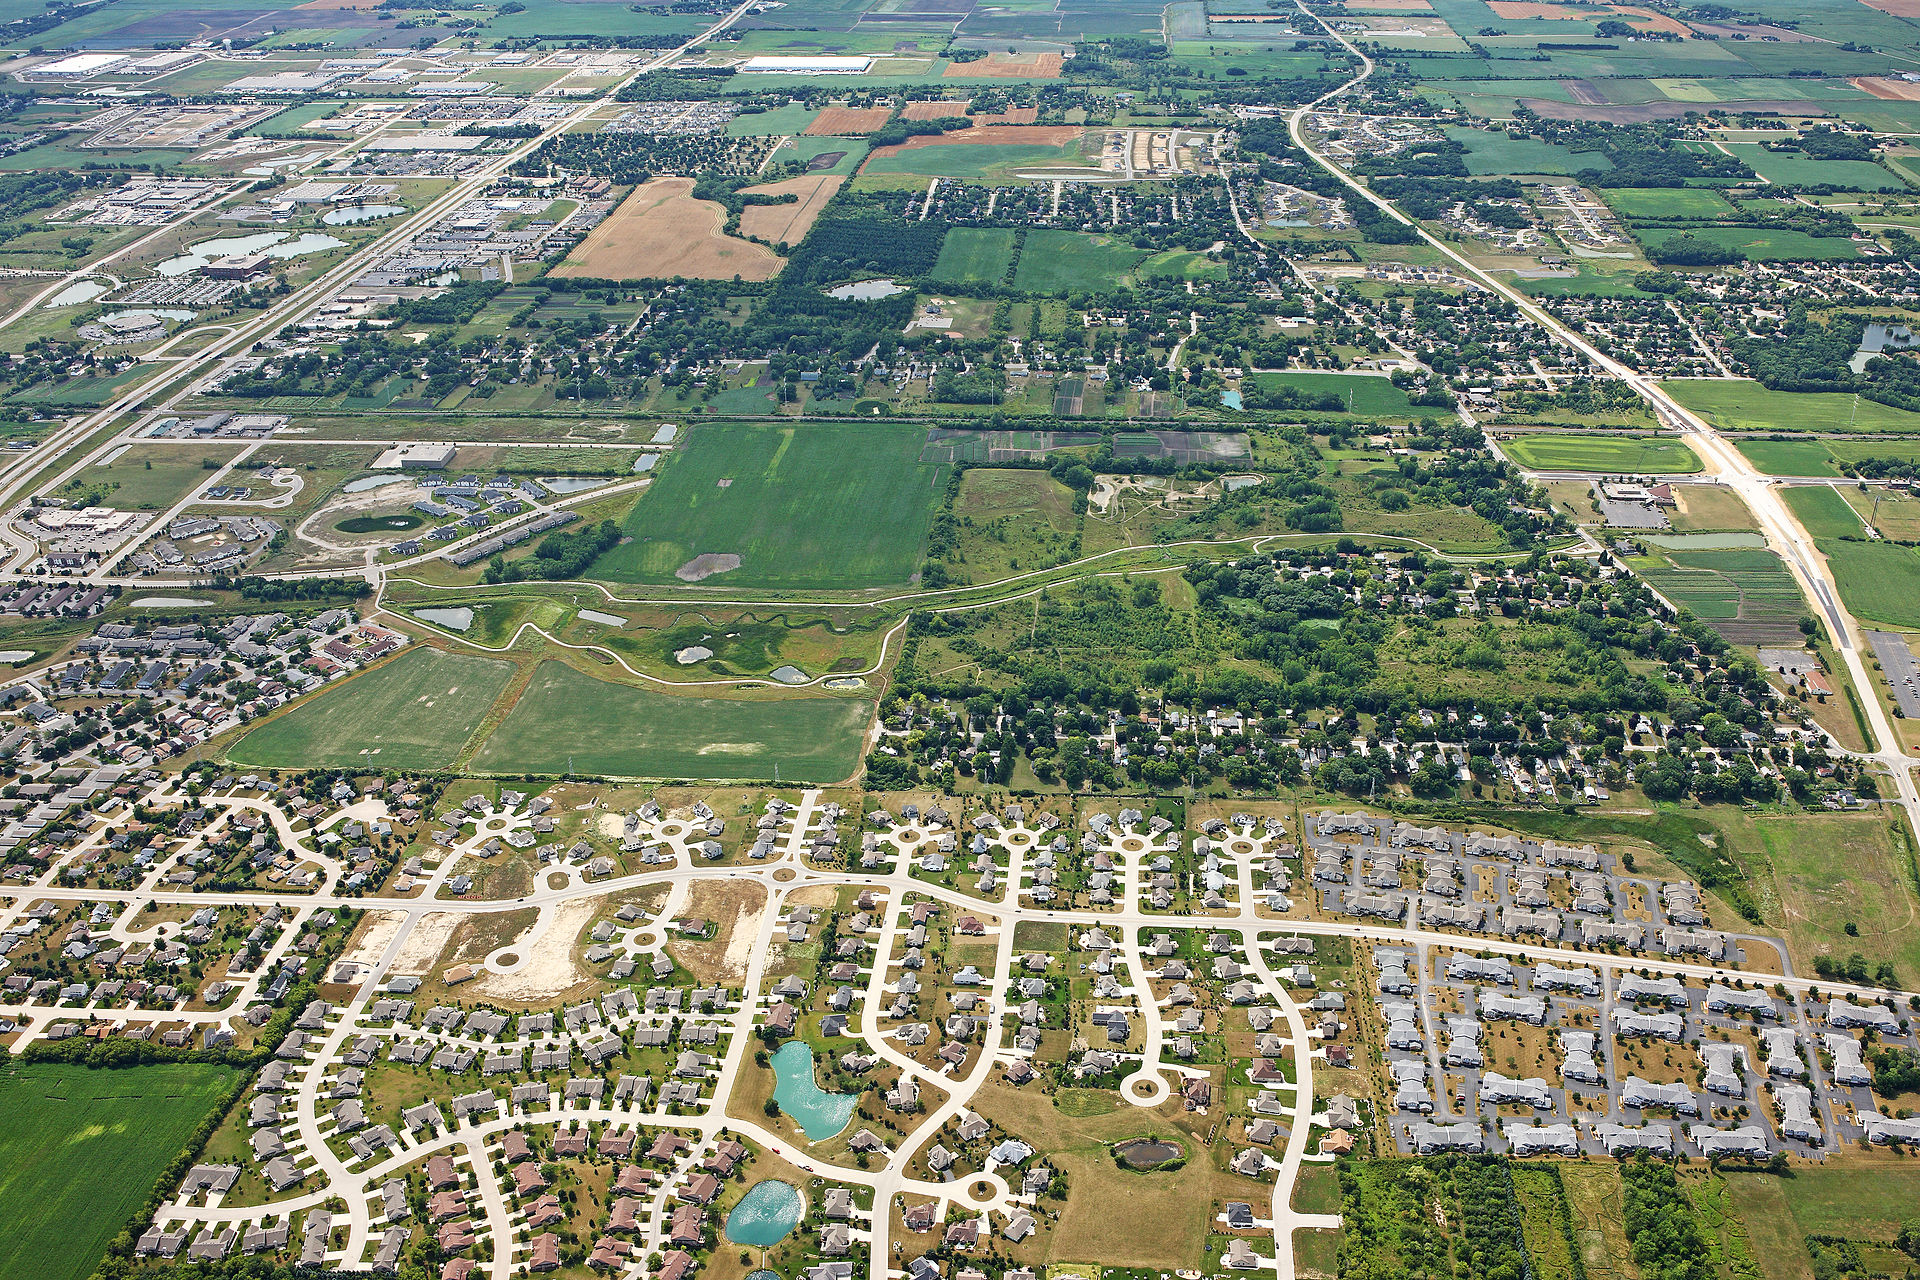 Aerial image of the Village of Mount Pleasant